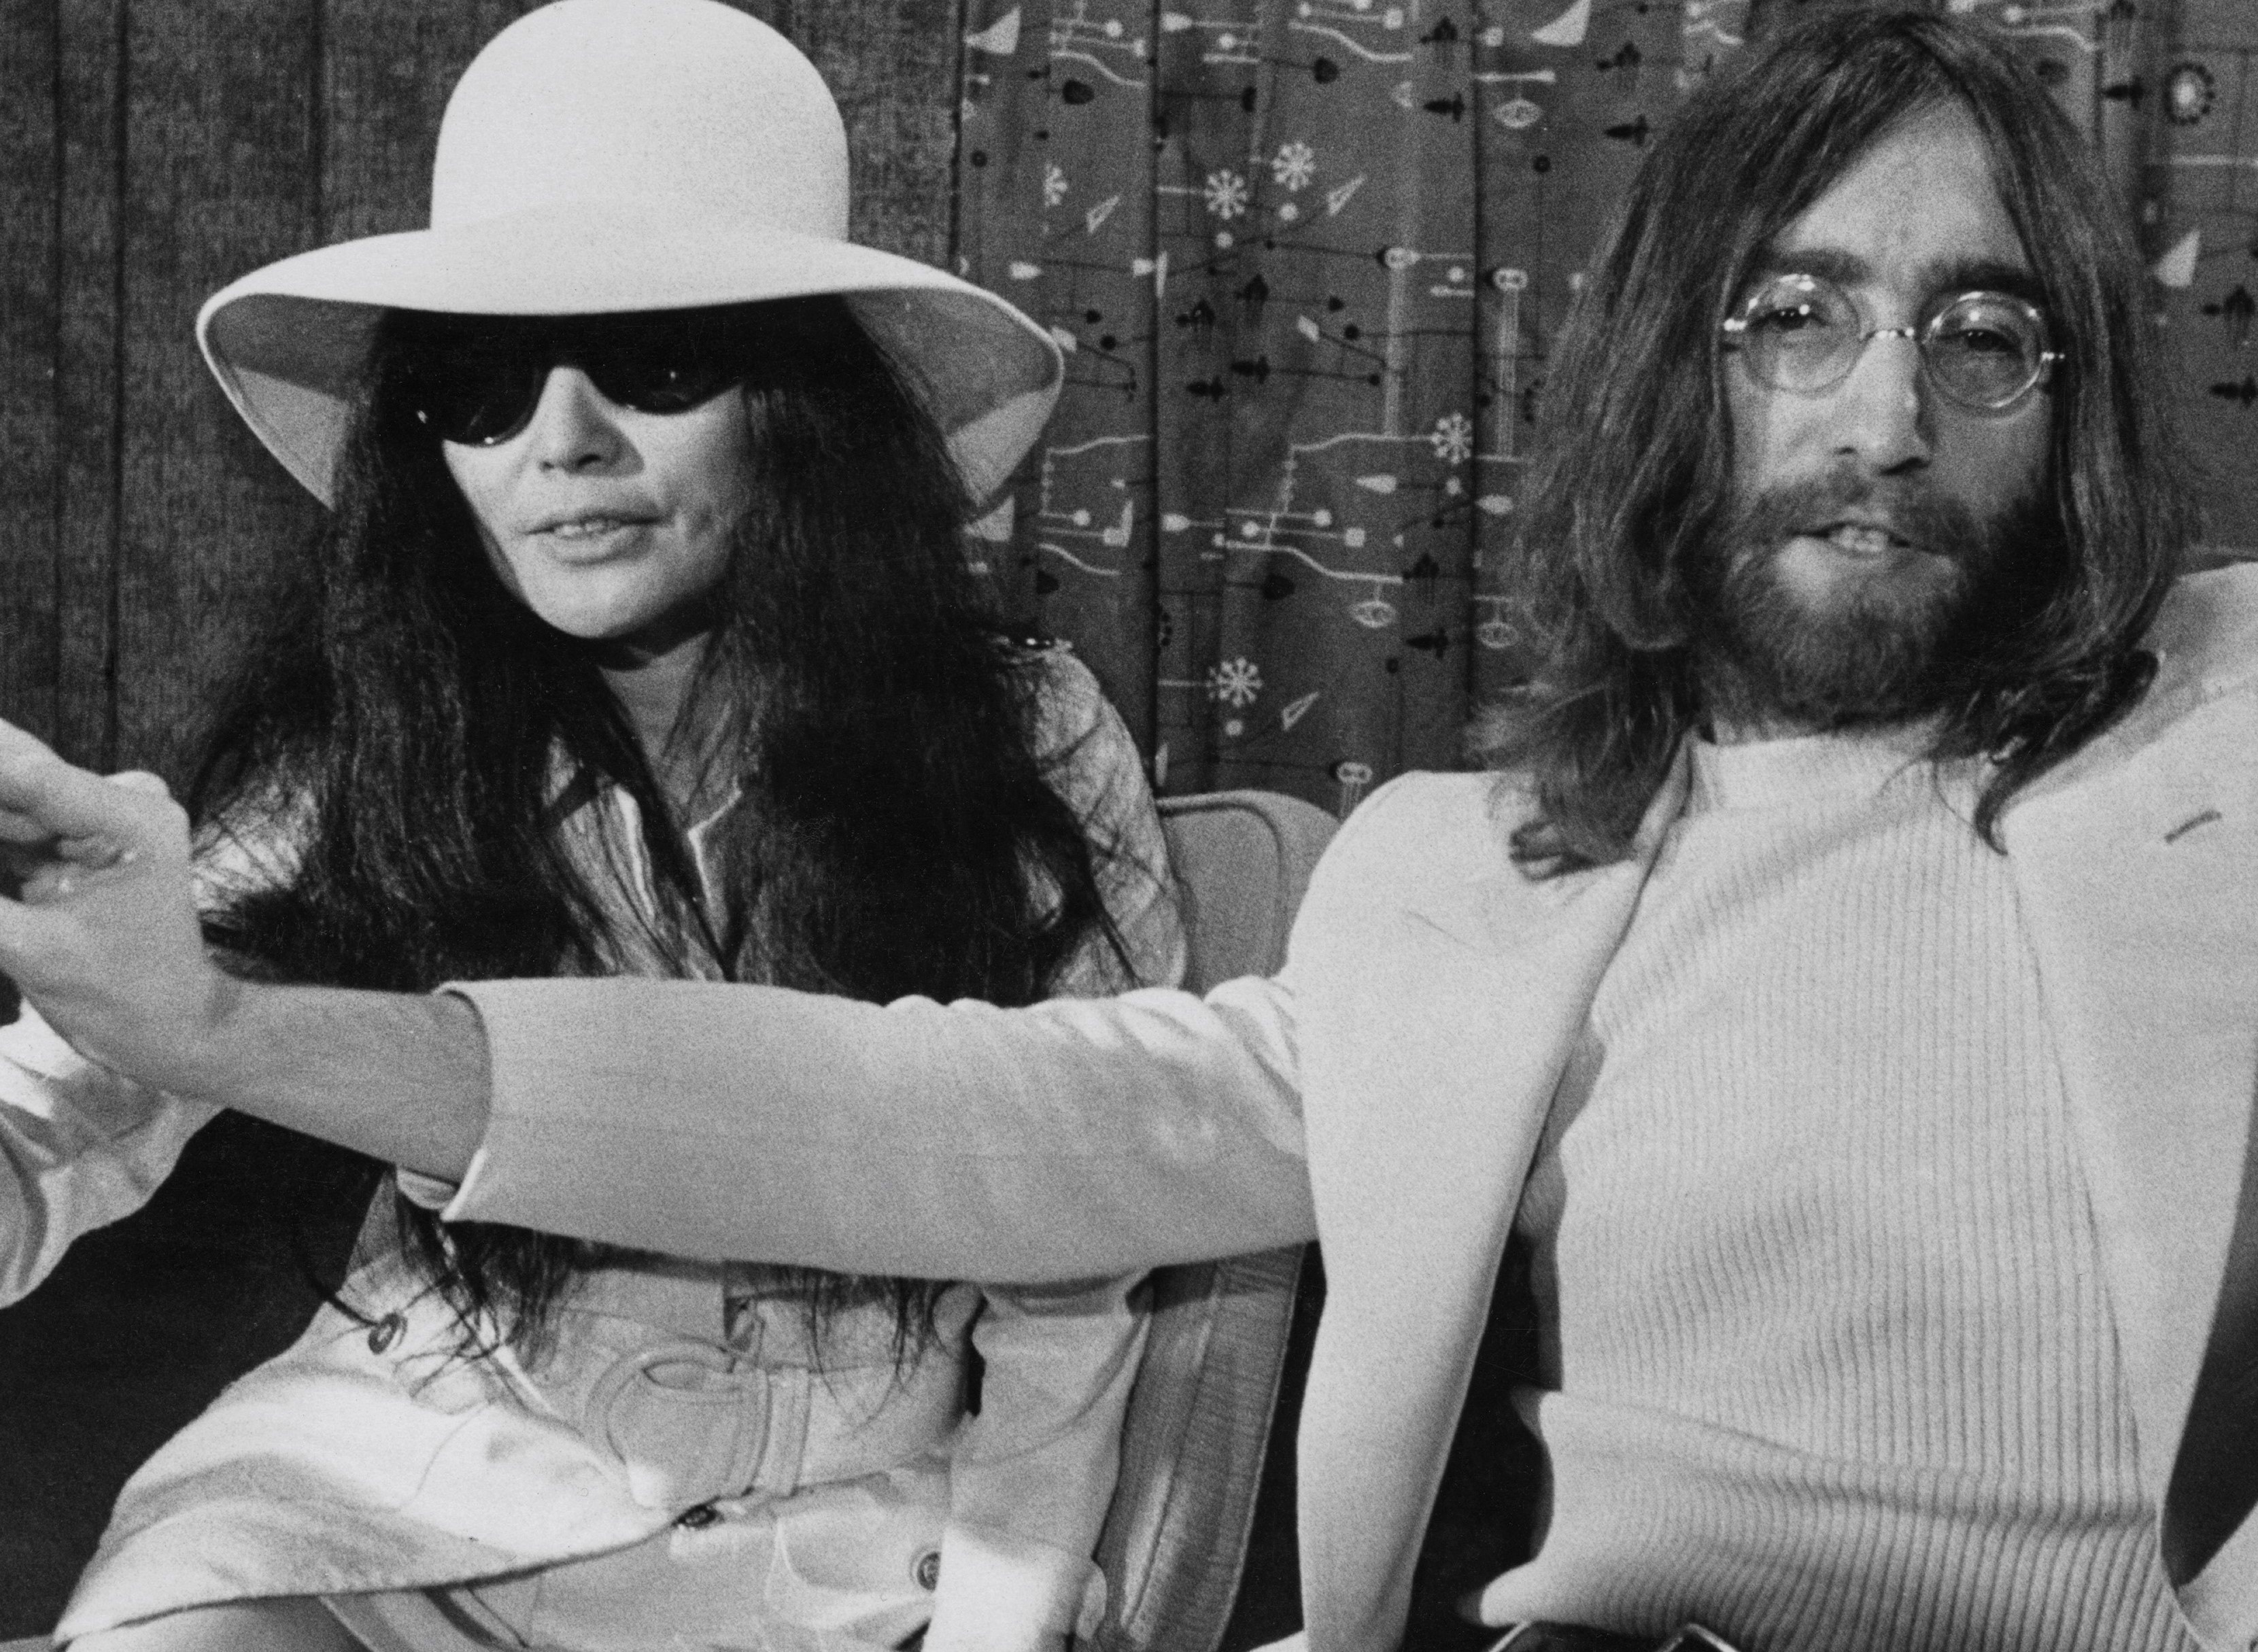 Yoko Ono and John Lennon in front of a curtain